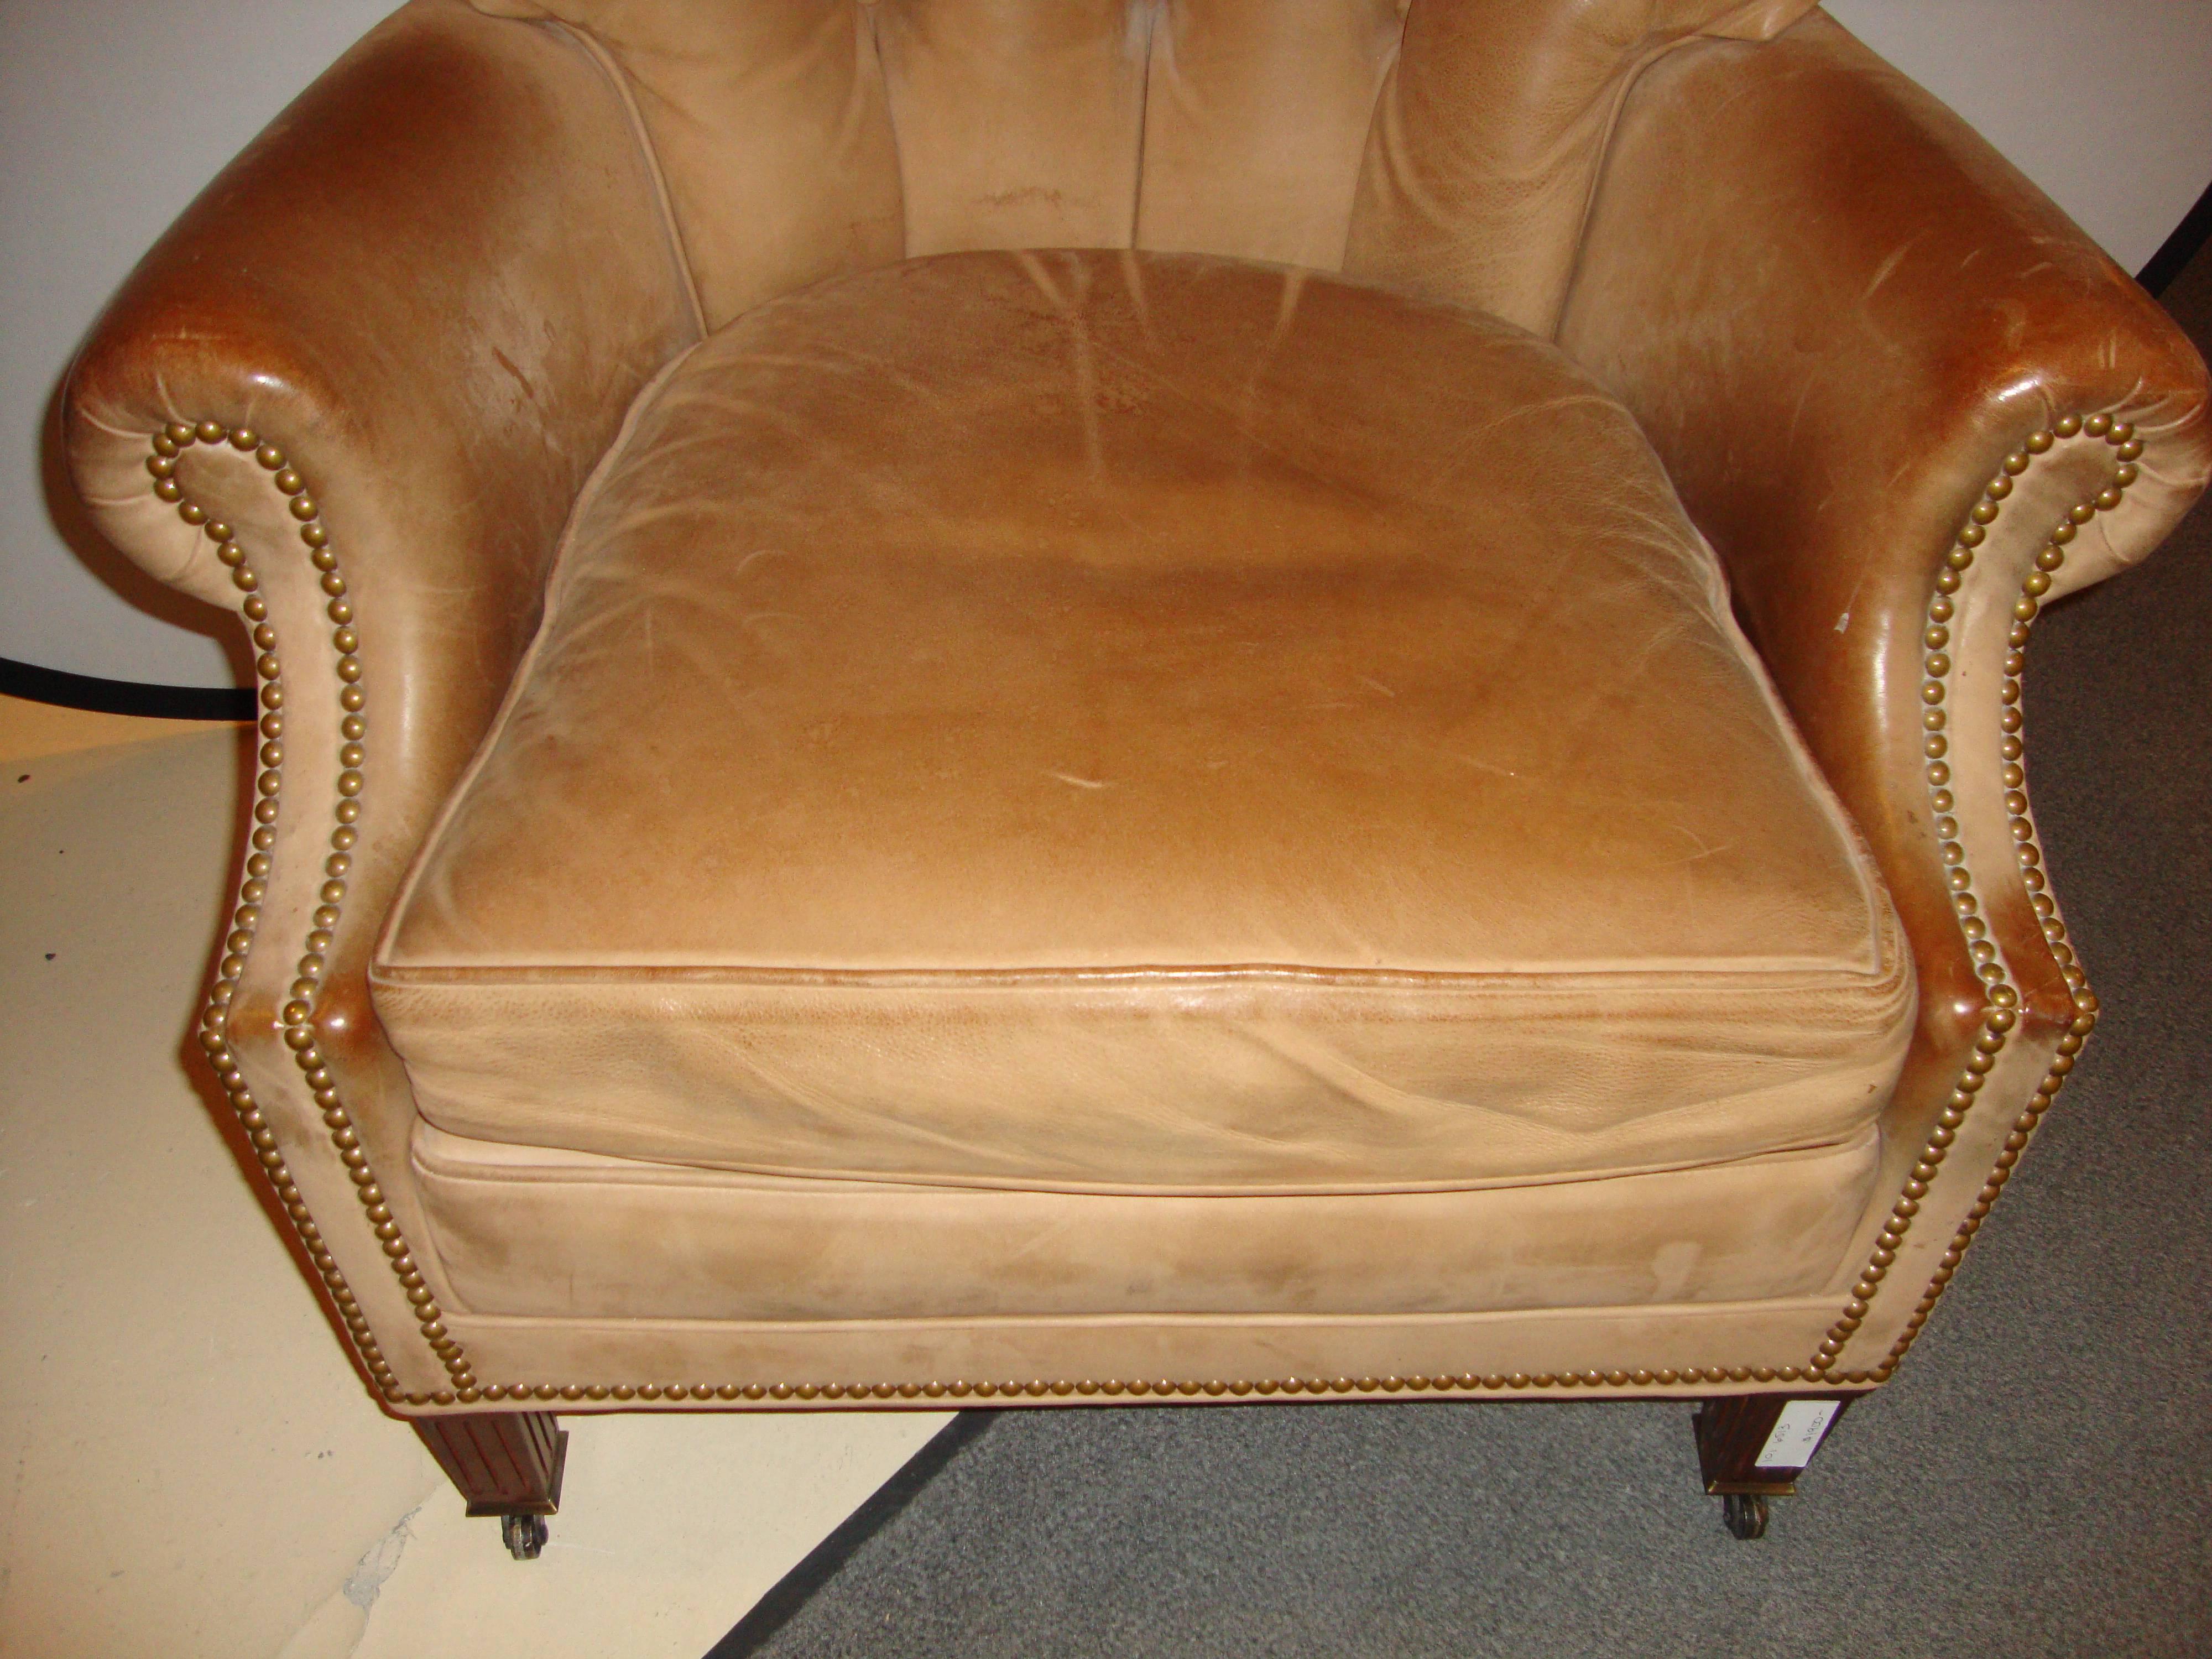 Hancock & Moore Leather Tufted Back with Nailhead Design Armchair 1